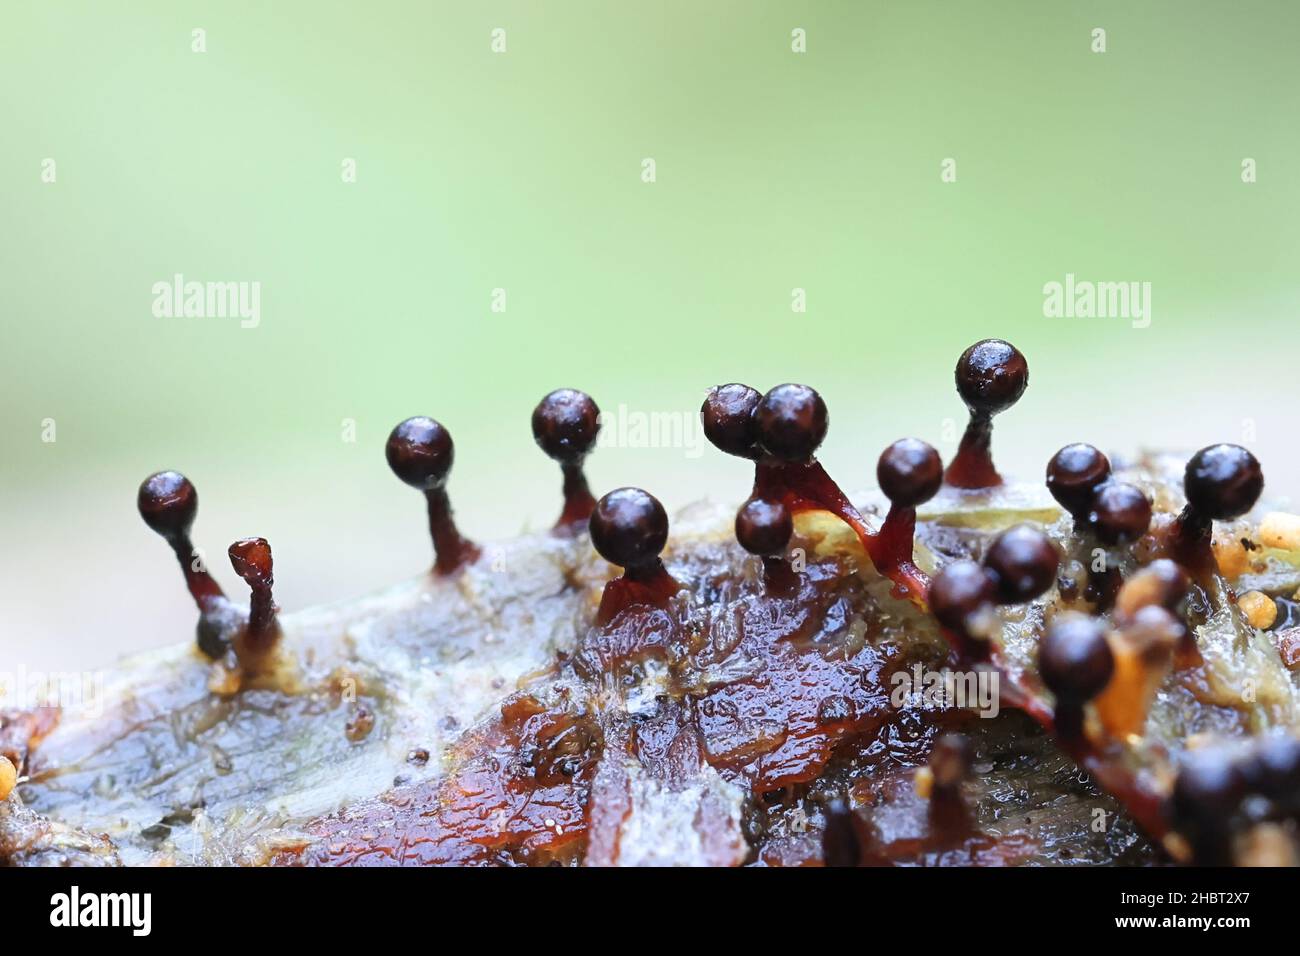 Stock photo of Slime mould (Lamproderma scintillans) growing on tiny twig  held in hand to…. Available for sale on